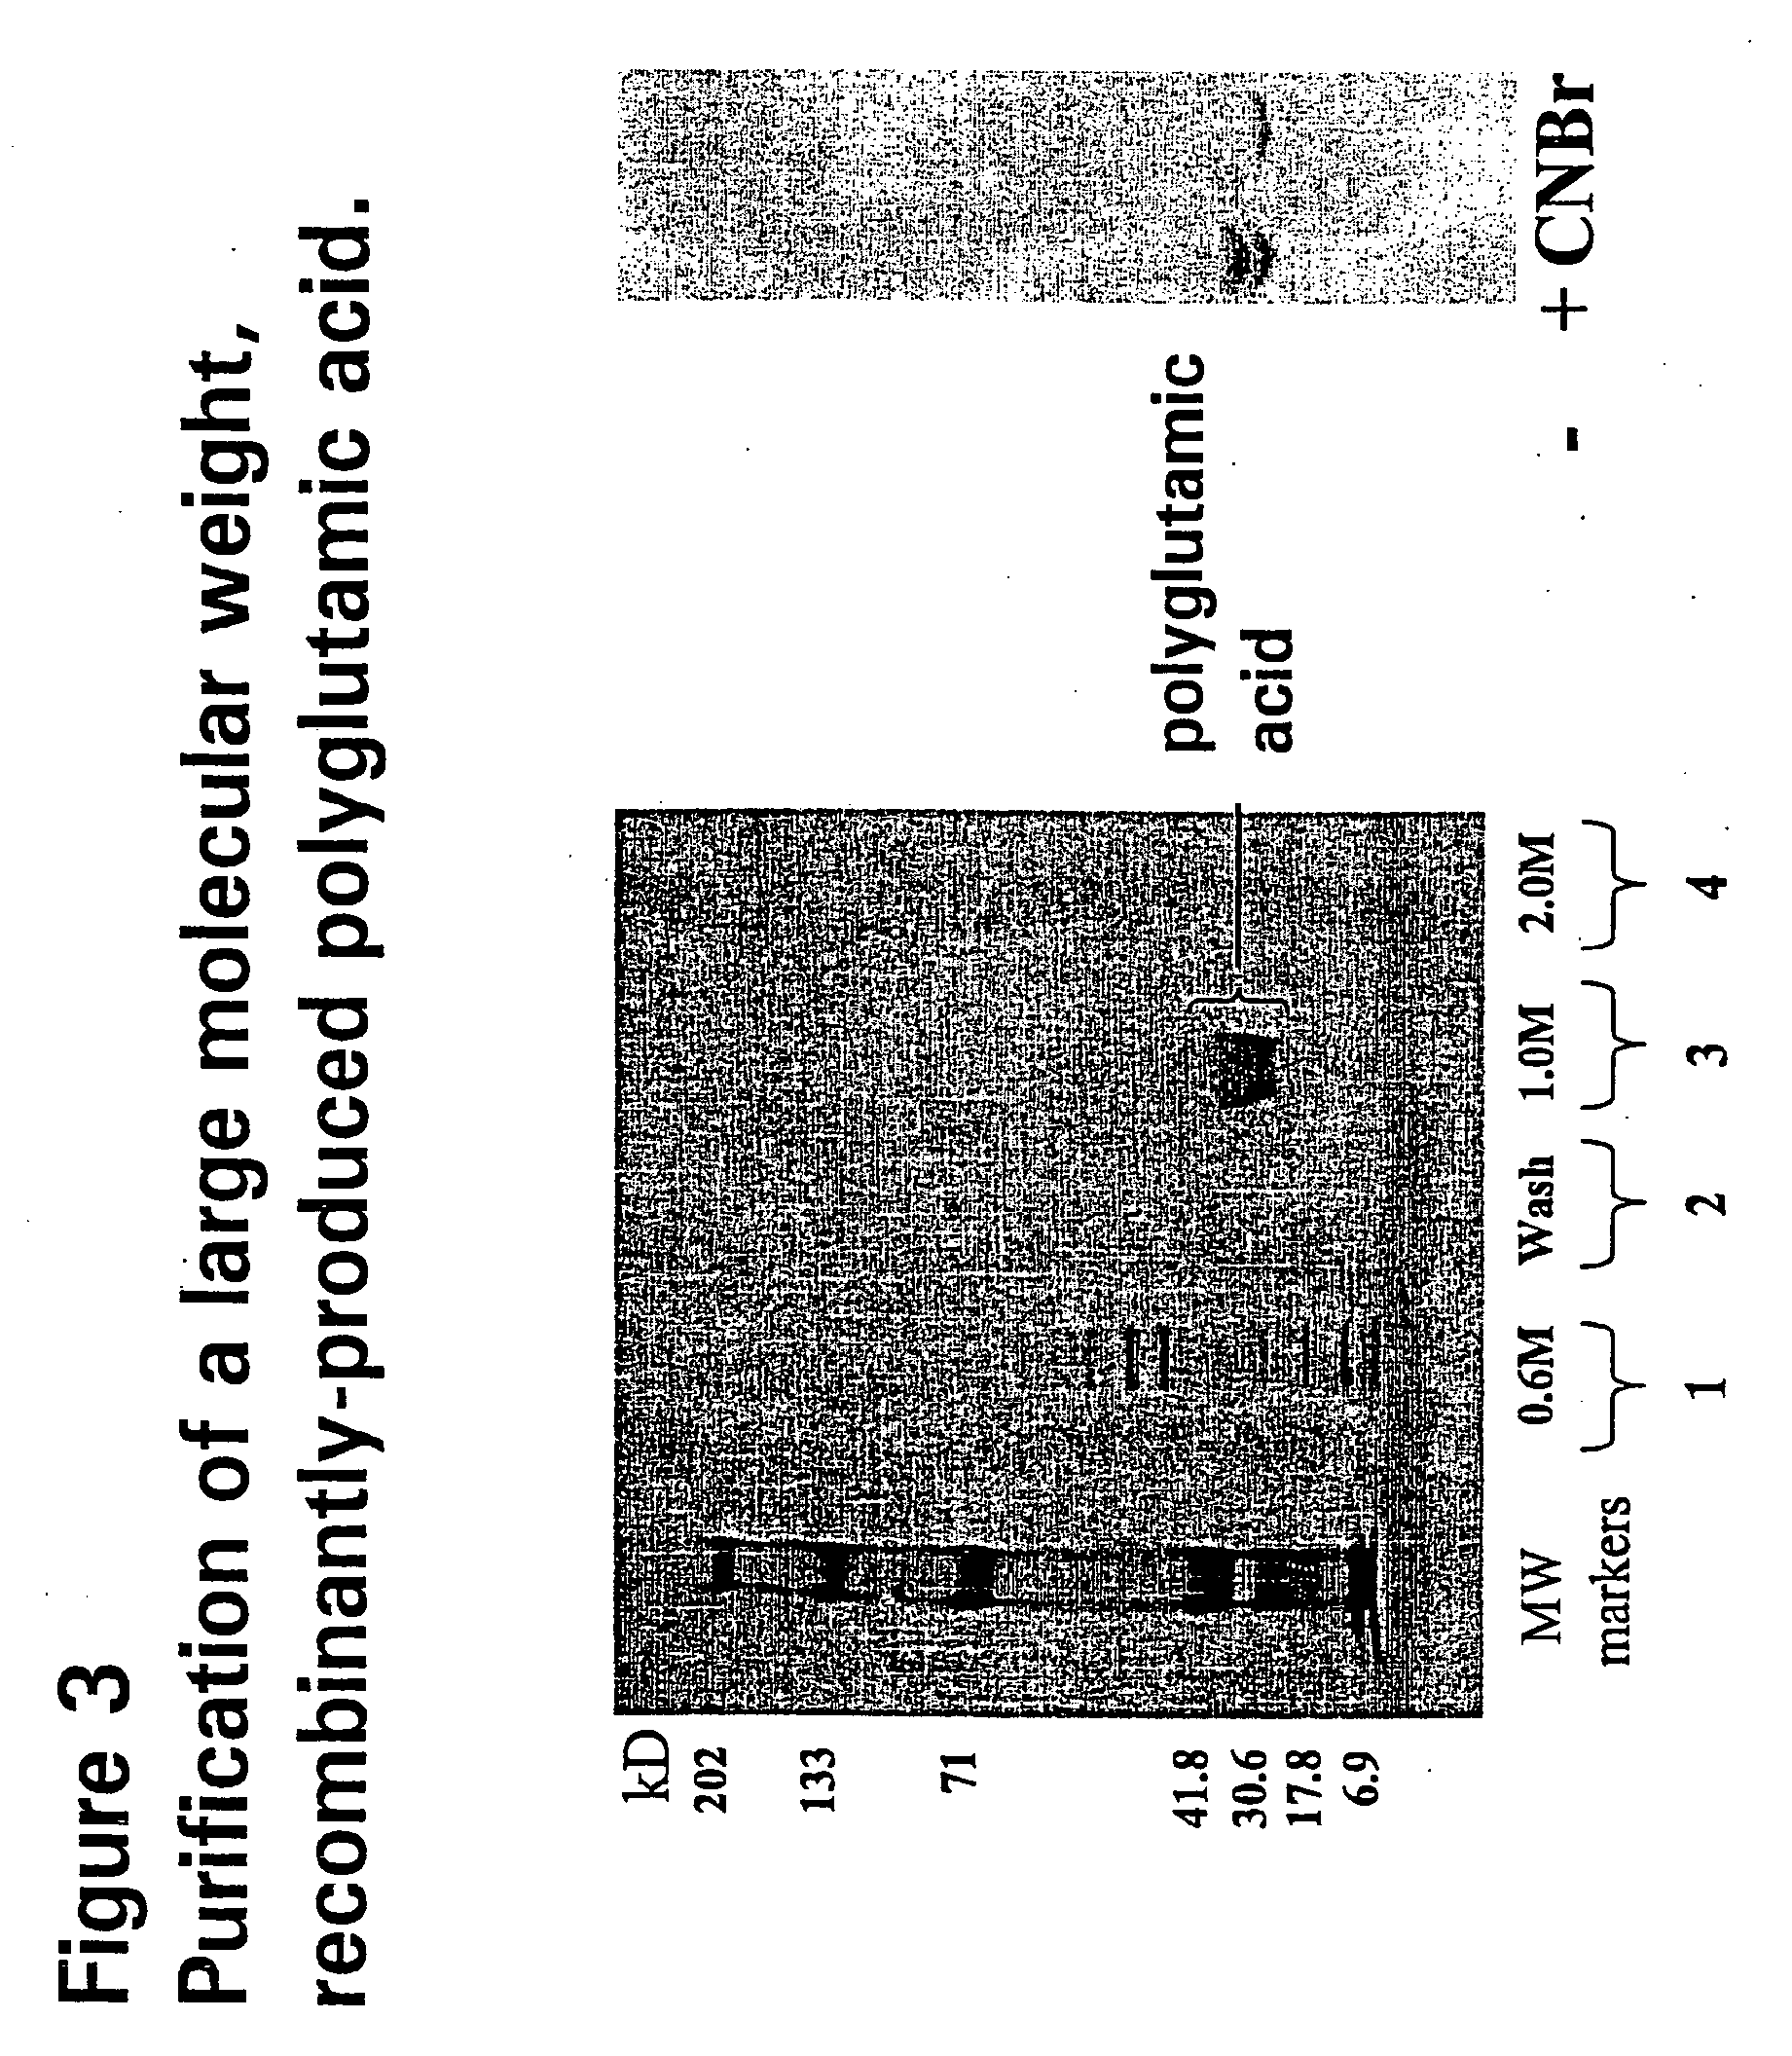 Recombinant Production of Polyanionic Polymers, and Uses Thereof